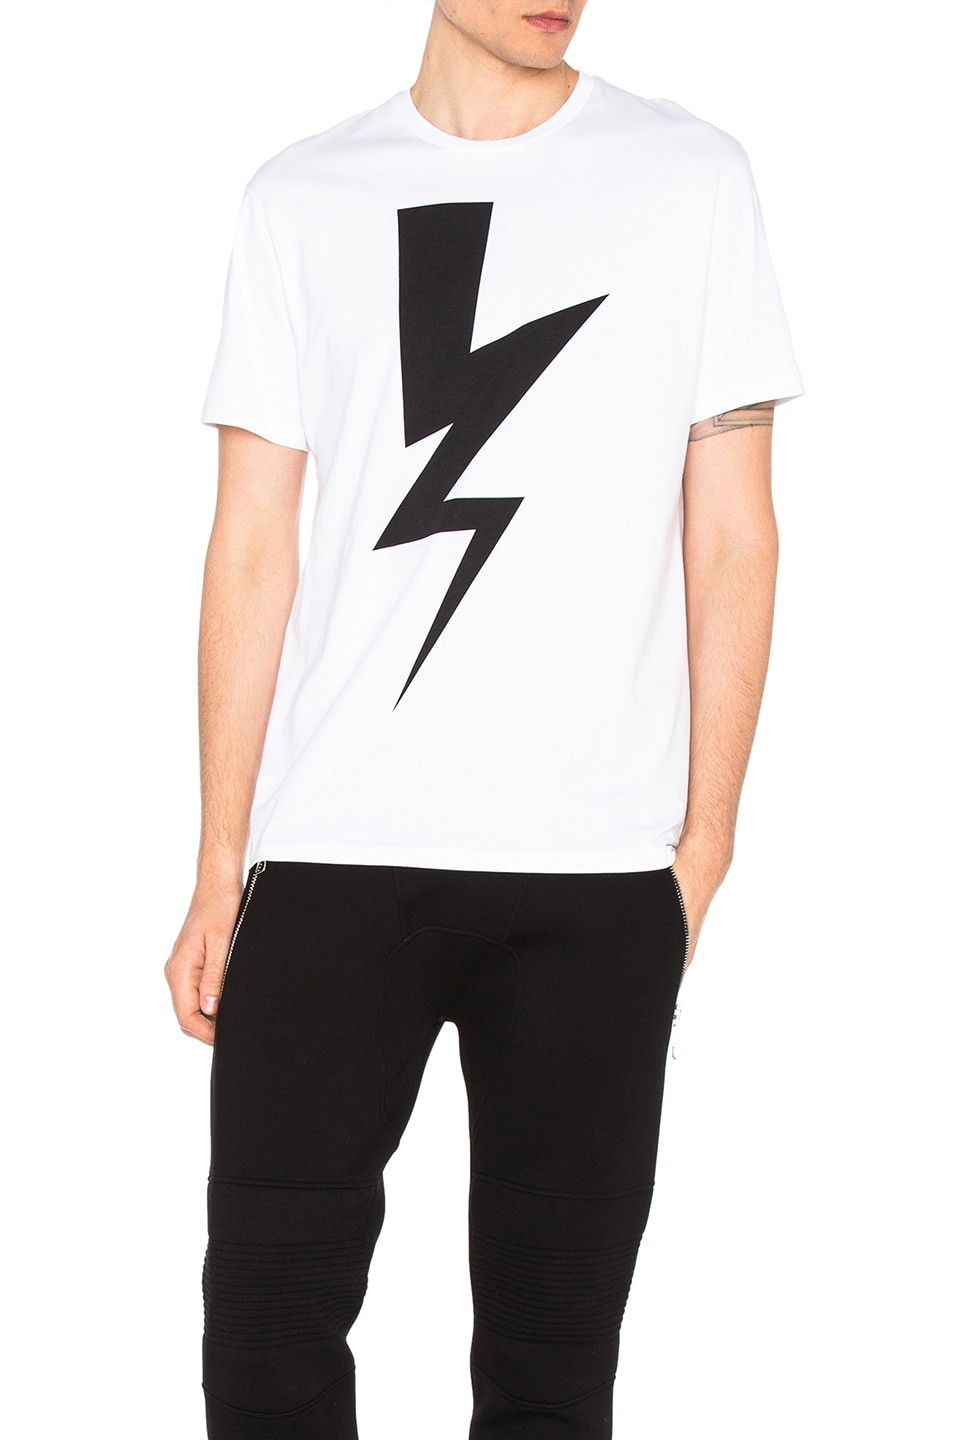 Image 1 of Neil Barrett Abstracted Bolt Tee in White & Black